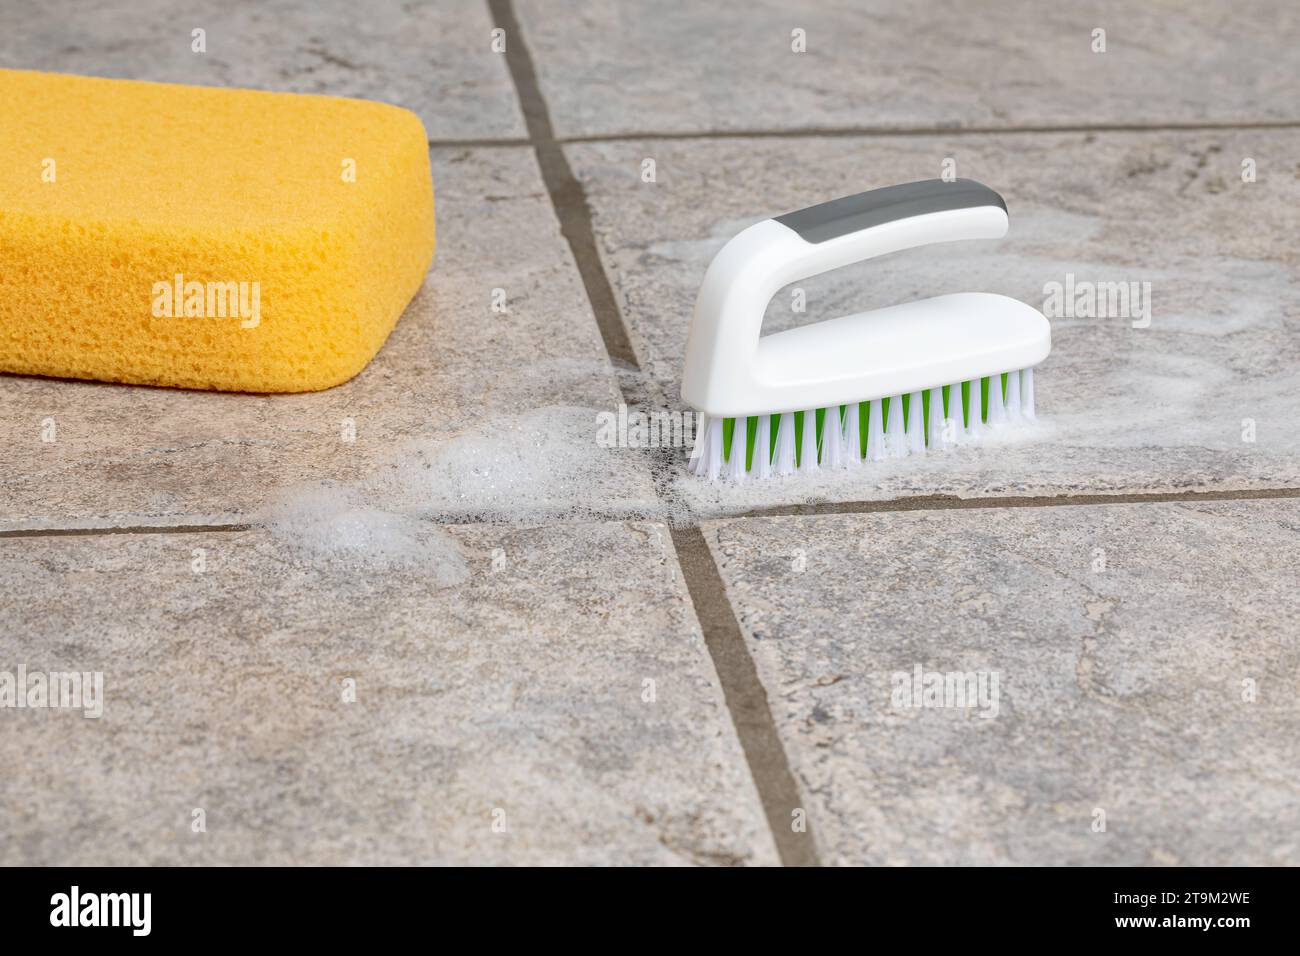 Cleaning ceramic tile floor with scrub brush and sponge. Housekeeping, household chores and floor care concept. Stock Photo